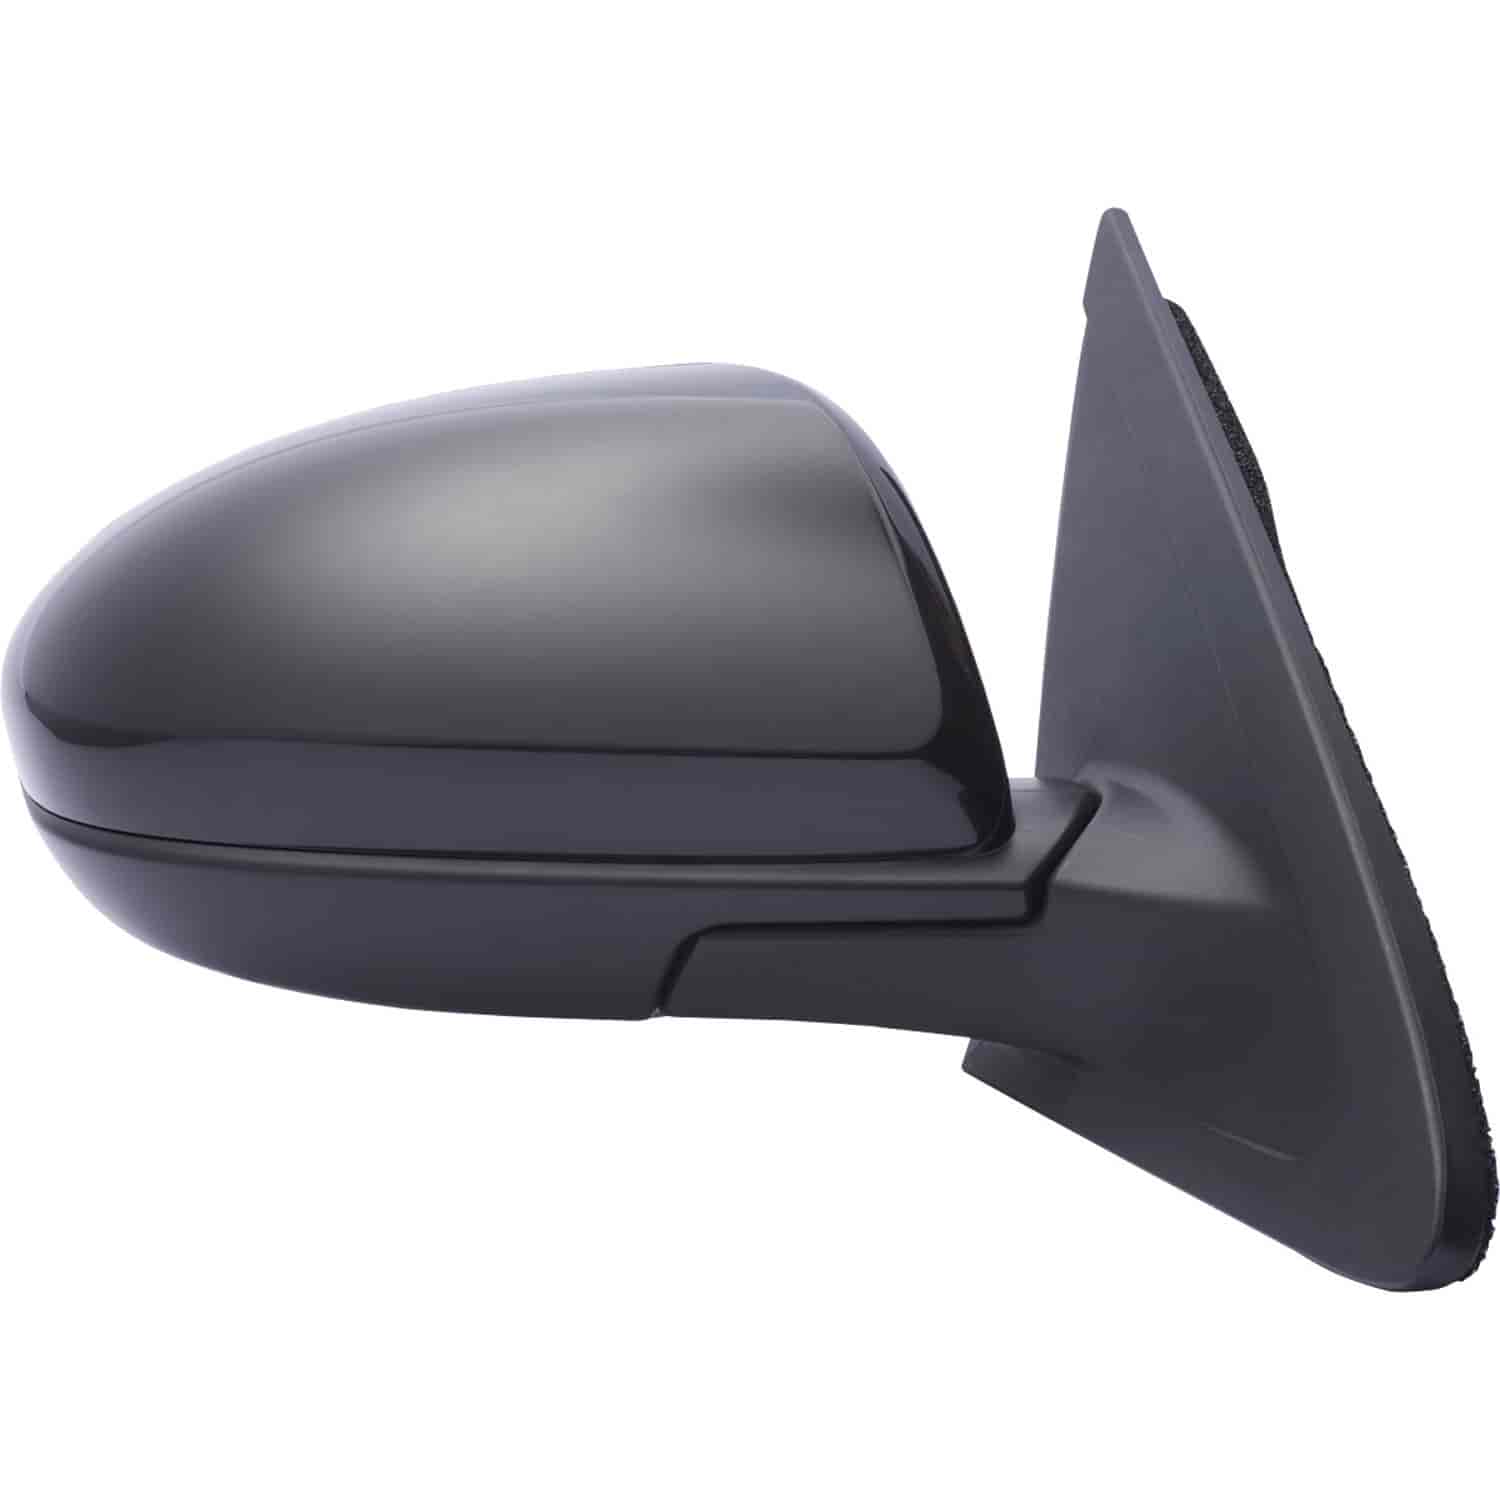 OEM Style Replacement mirror for 10-13 Mazda 3 w/o turn signal passenger side mirror tested to fit a